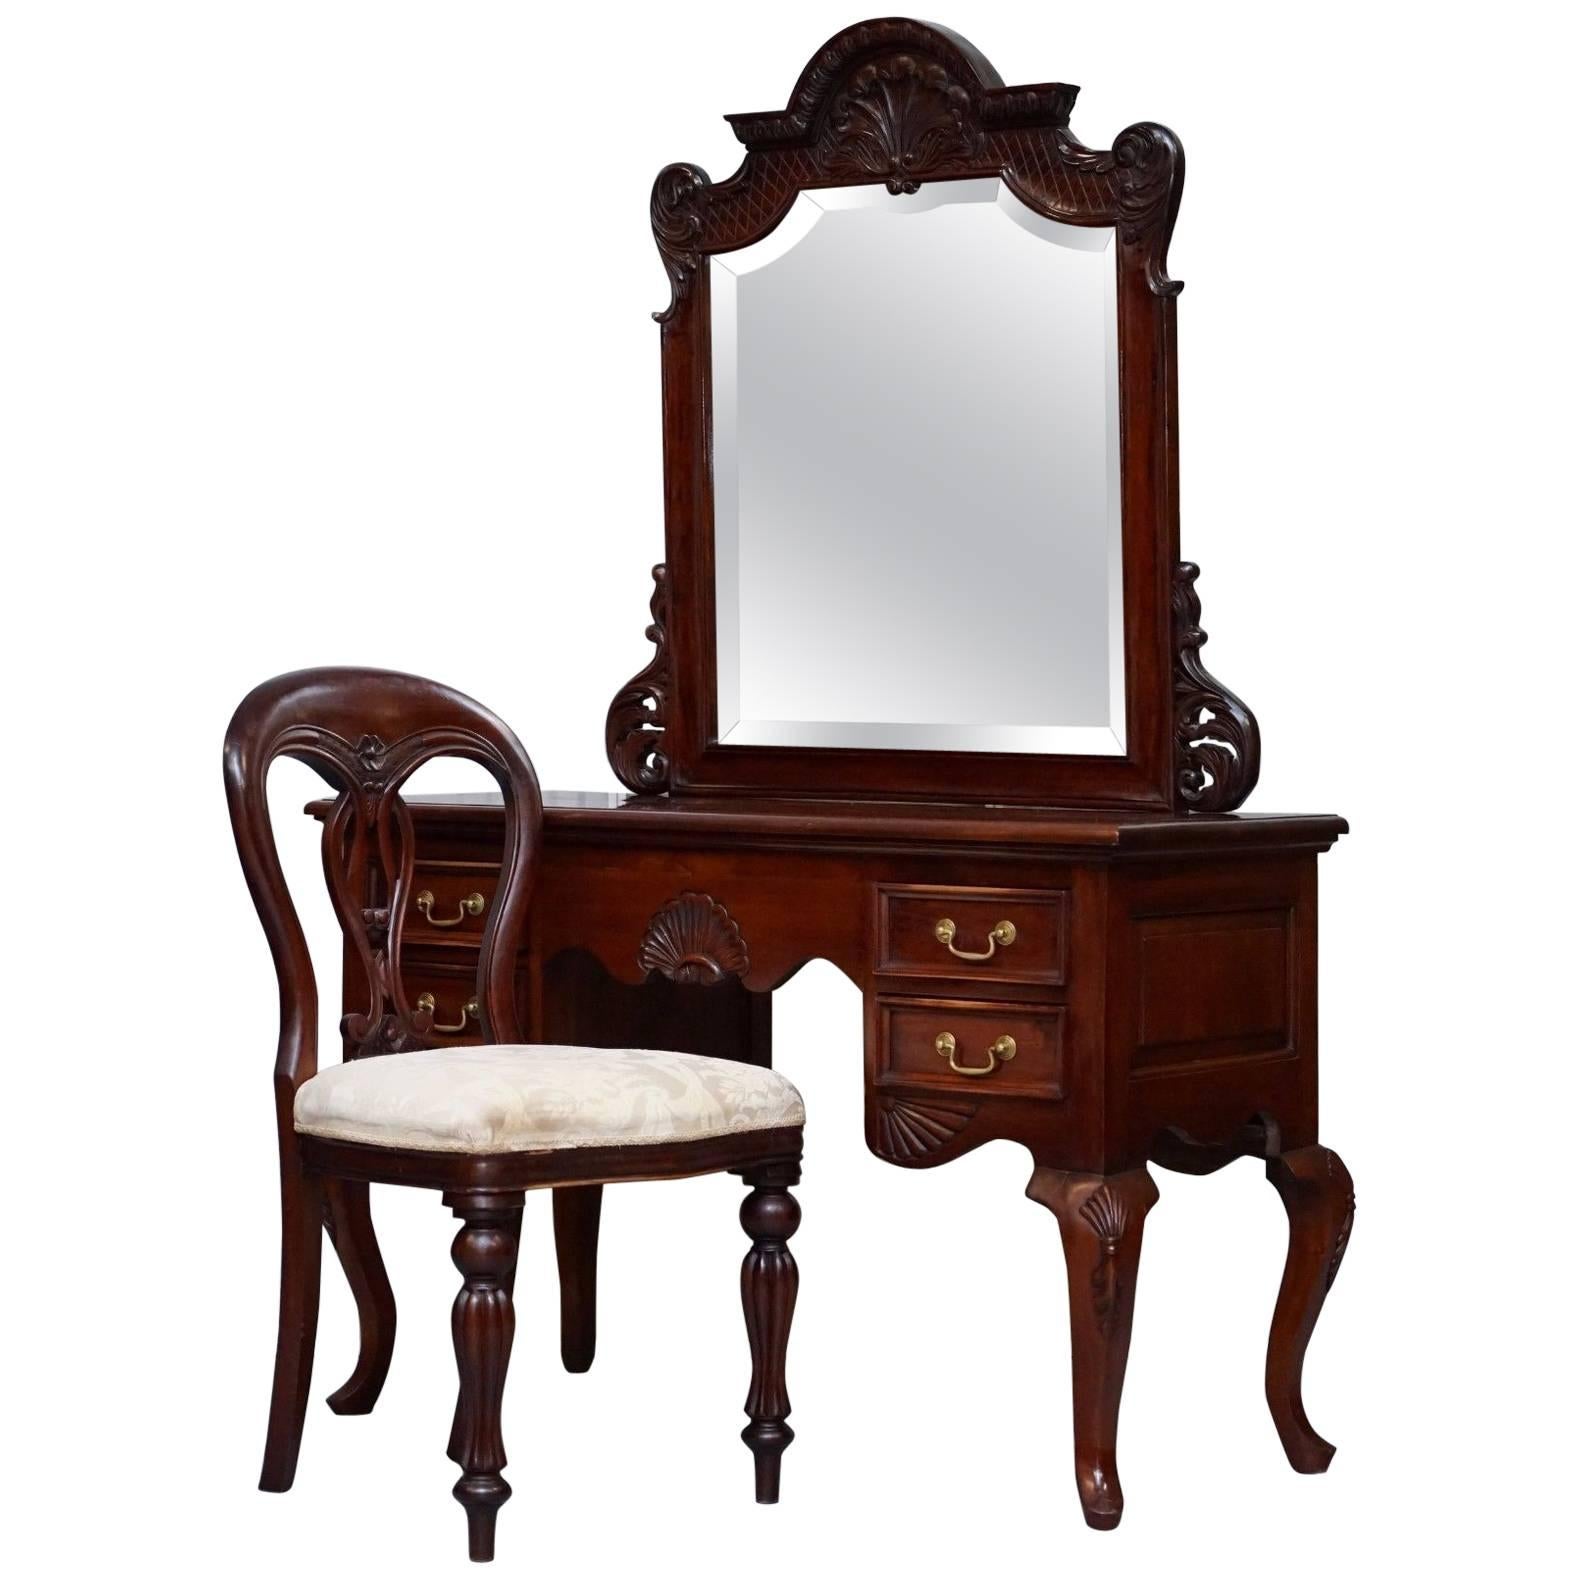 Lovely Solid Carved Mahogany French Louis Style Dressing Table Mirror and Chair